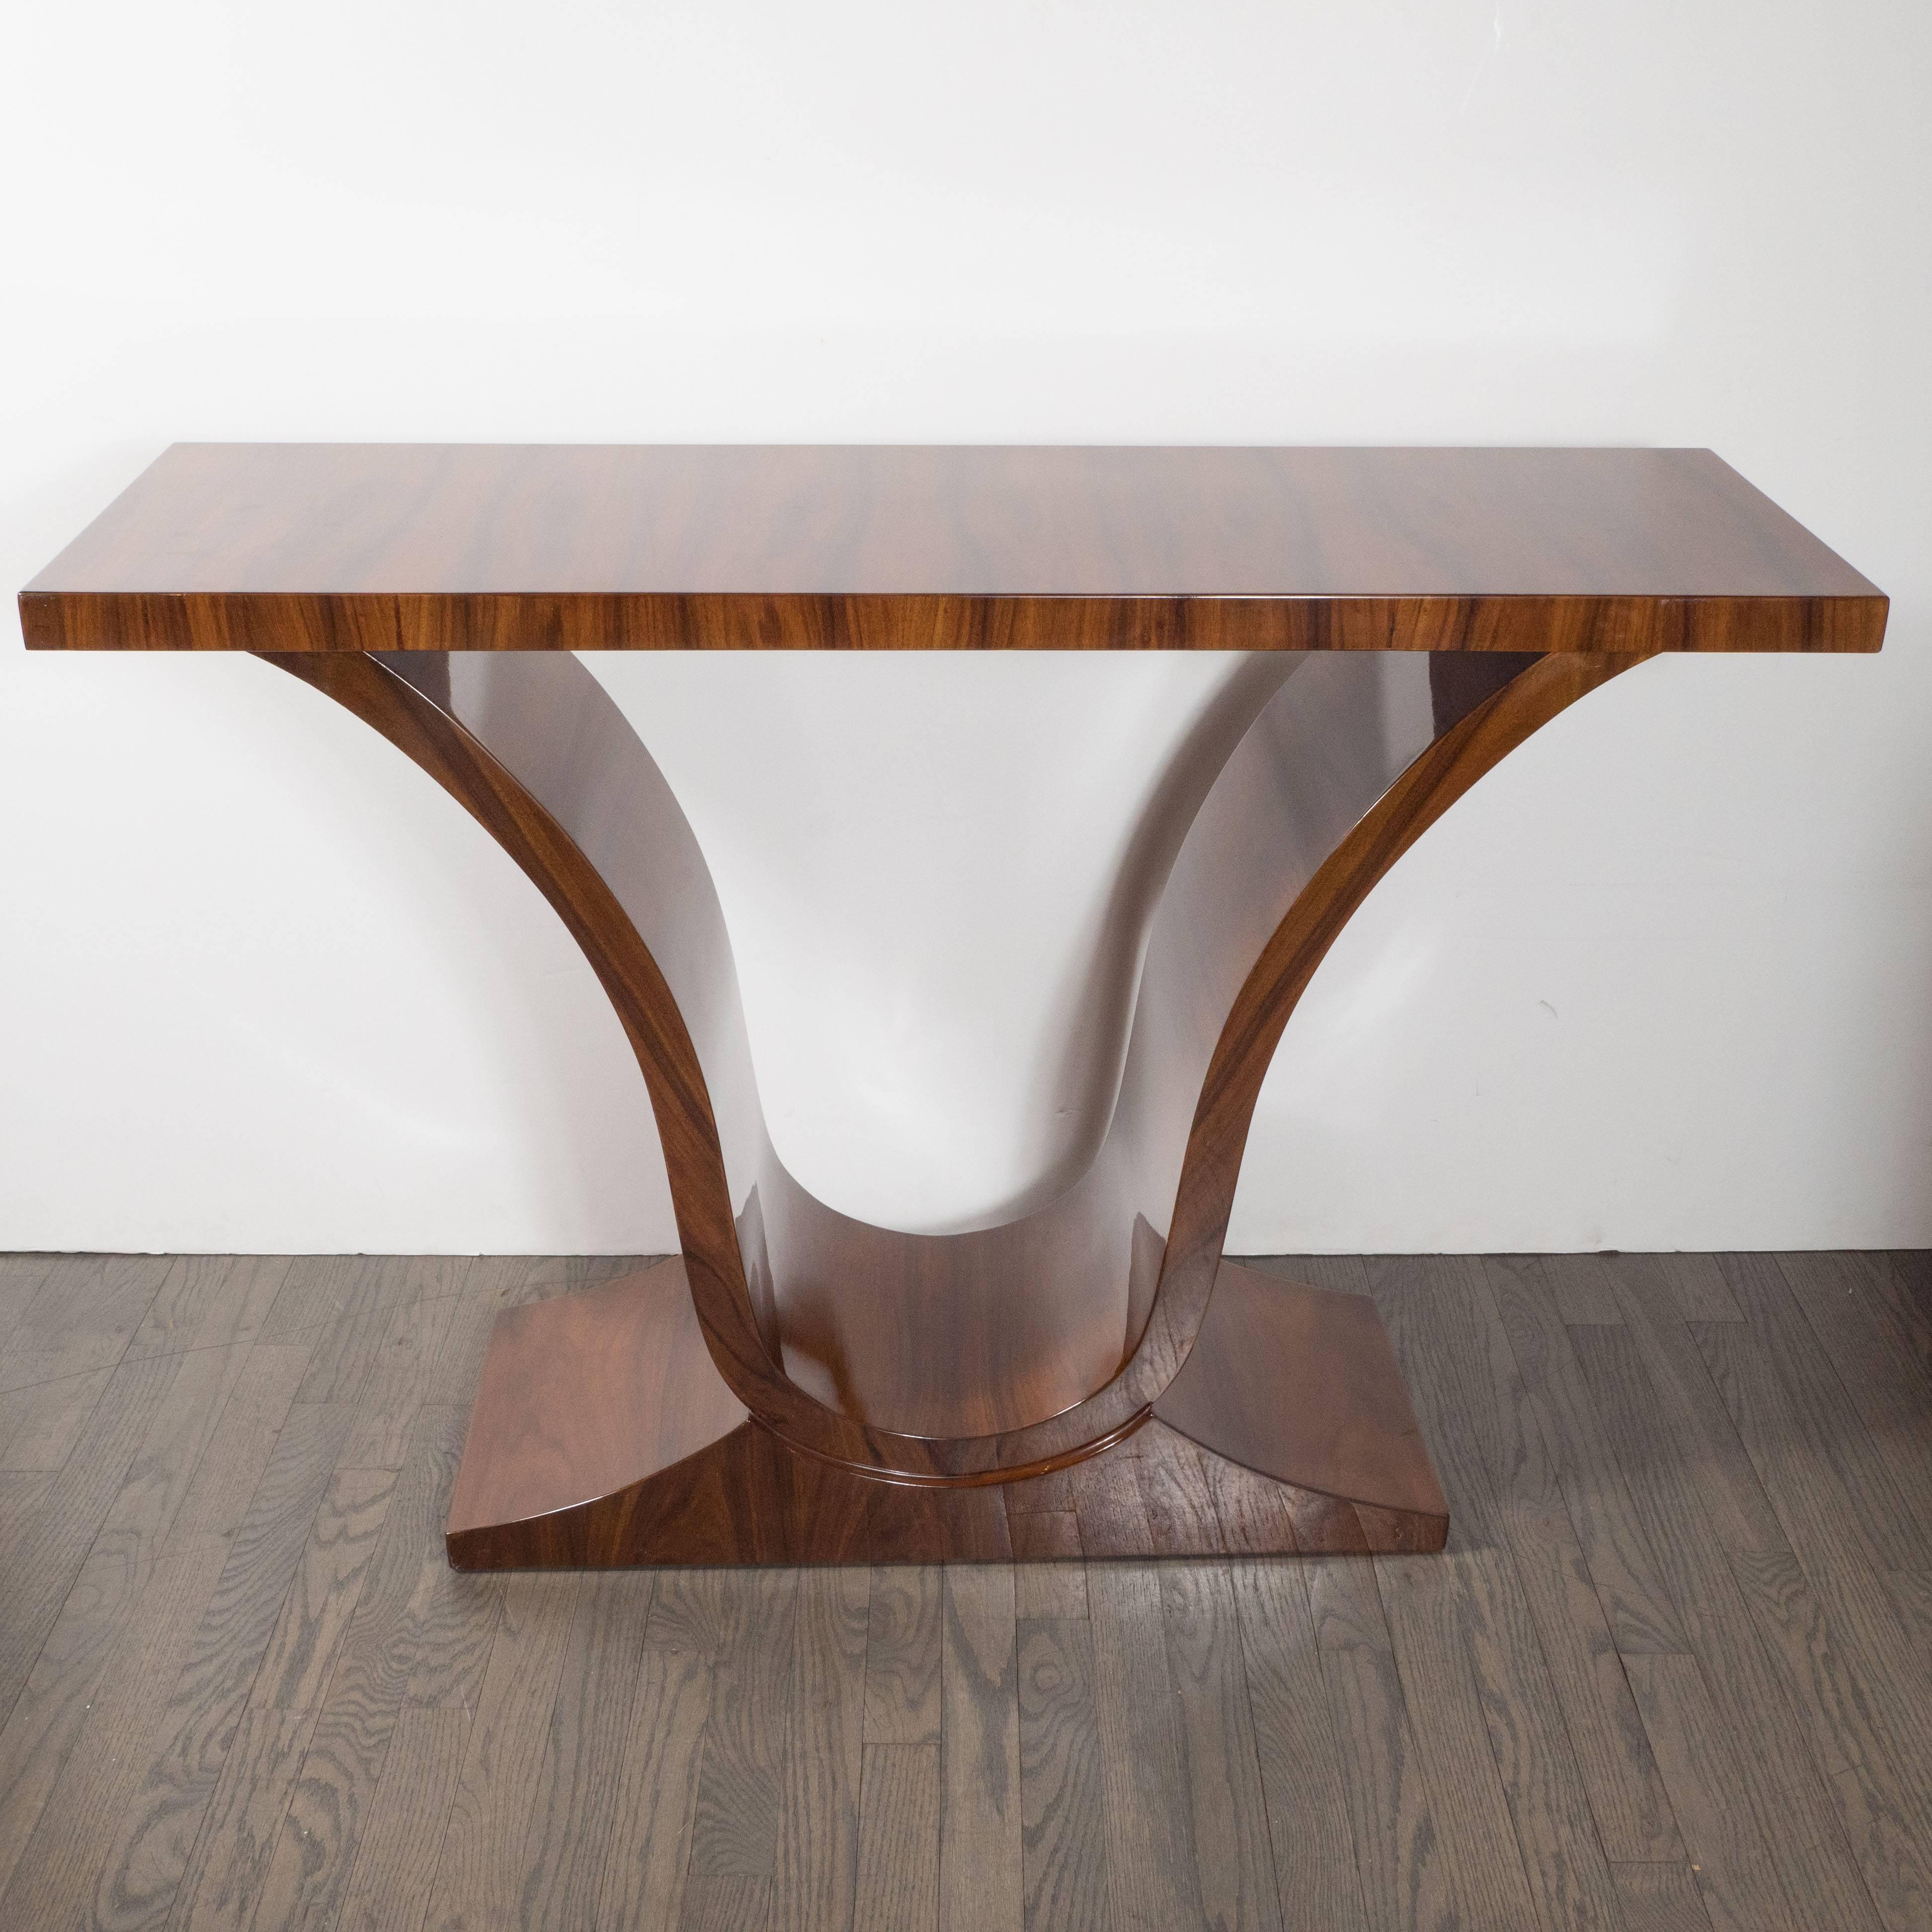 This refined console table was realized in France, circa 1935, at the height of Art Deco. It features a classically inspired urn form consisting of a single undulating curve, inspired by classical Greek design, in bookmatched walnut that offers a